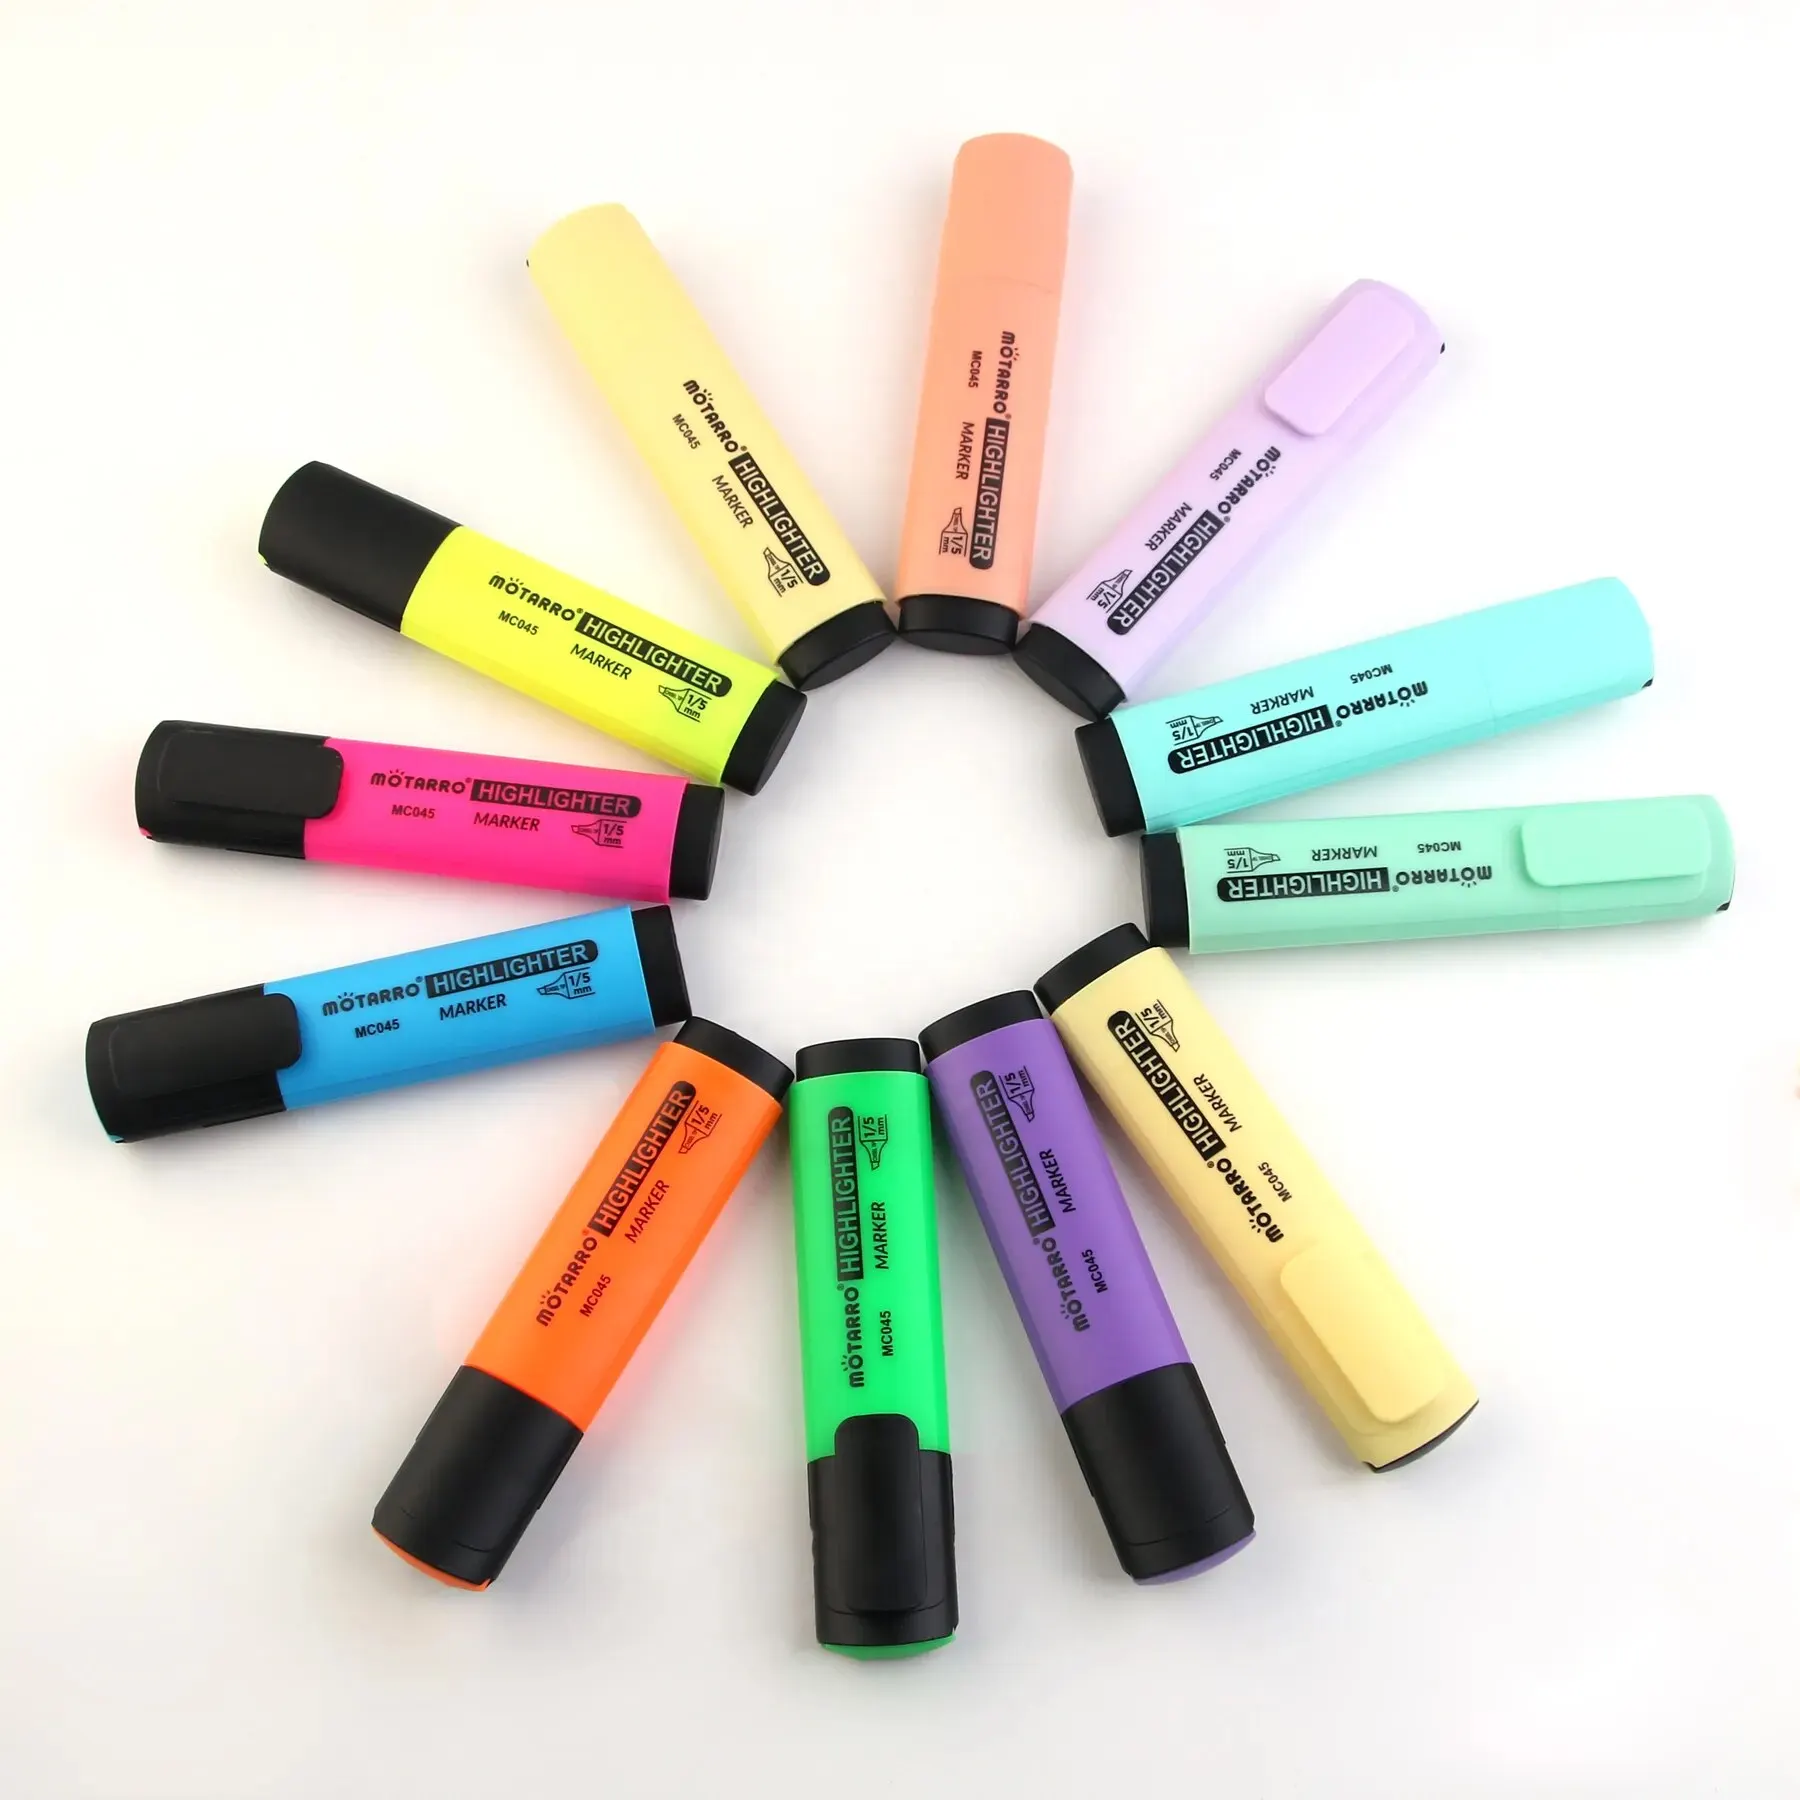 6pcs/set Tiny Markers With Fluorescent Colors & Cute Kawaii Design -  Perfect For Highlighting!